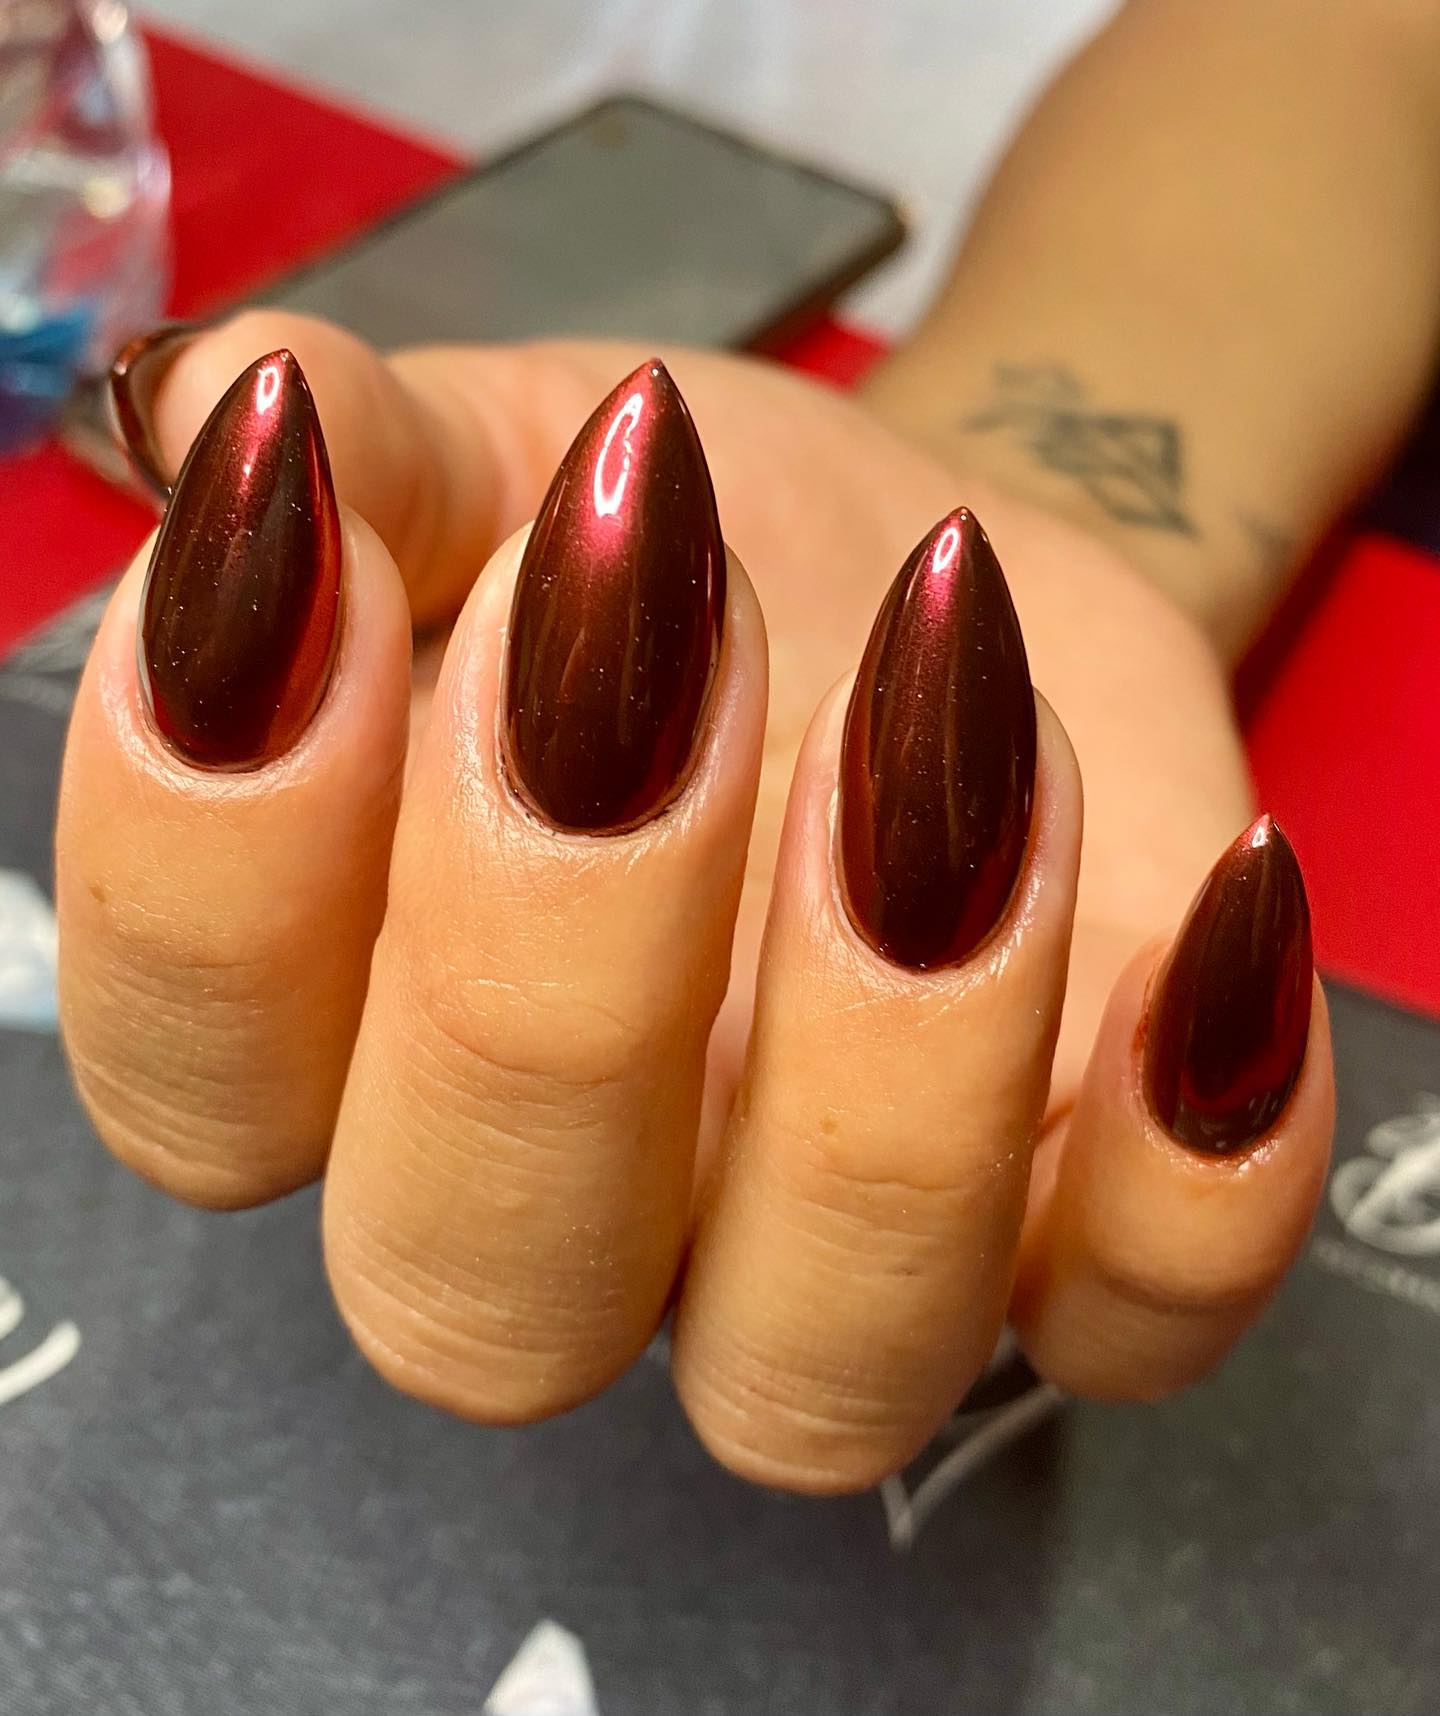 Metallic burgundy is not a popular choice but can you see how nice it looks on these stiletto nails?